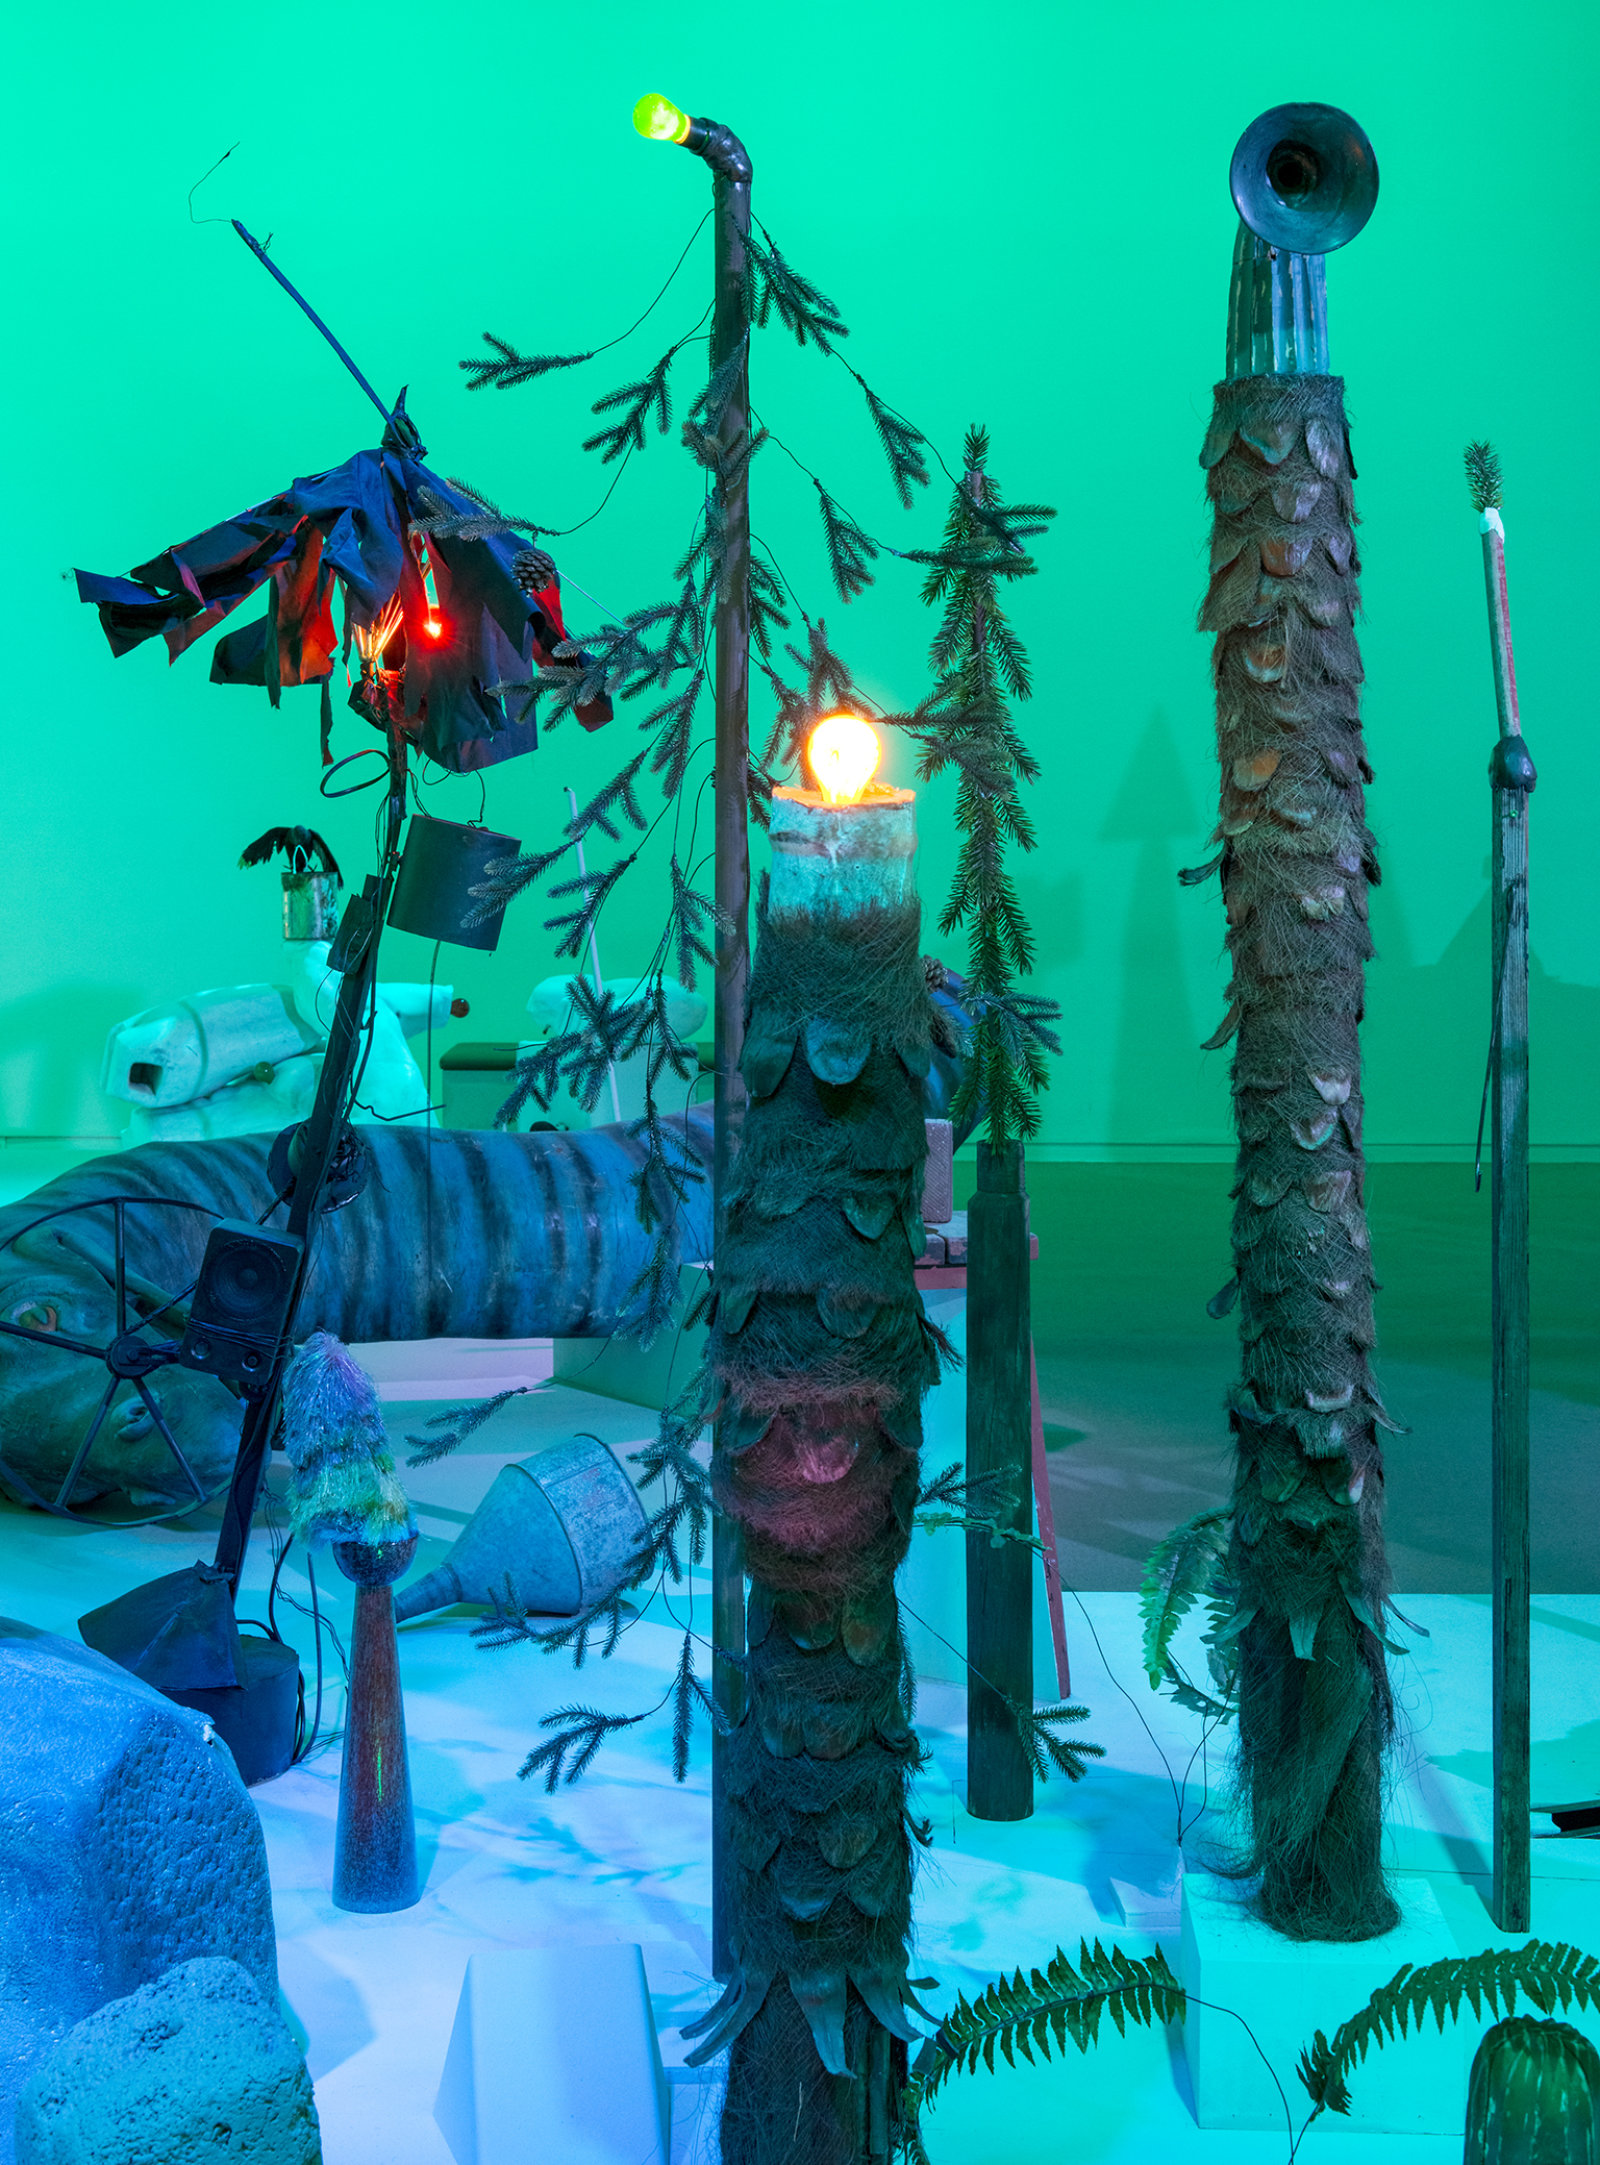 Geoffrey Farmer, Let's Make The Water Turn Black, 2013, a theatrical presentation of sculptural objects on a stage, with animatronics, audio and lighting directed by various computer programs, 289 x 360 x 90 in. (734 x 914 x 229 cm). Installation view, How Do I Fit This Ghost in My Mouth?, Vancouver Art Gallery, 2015